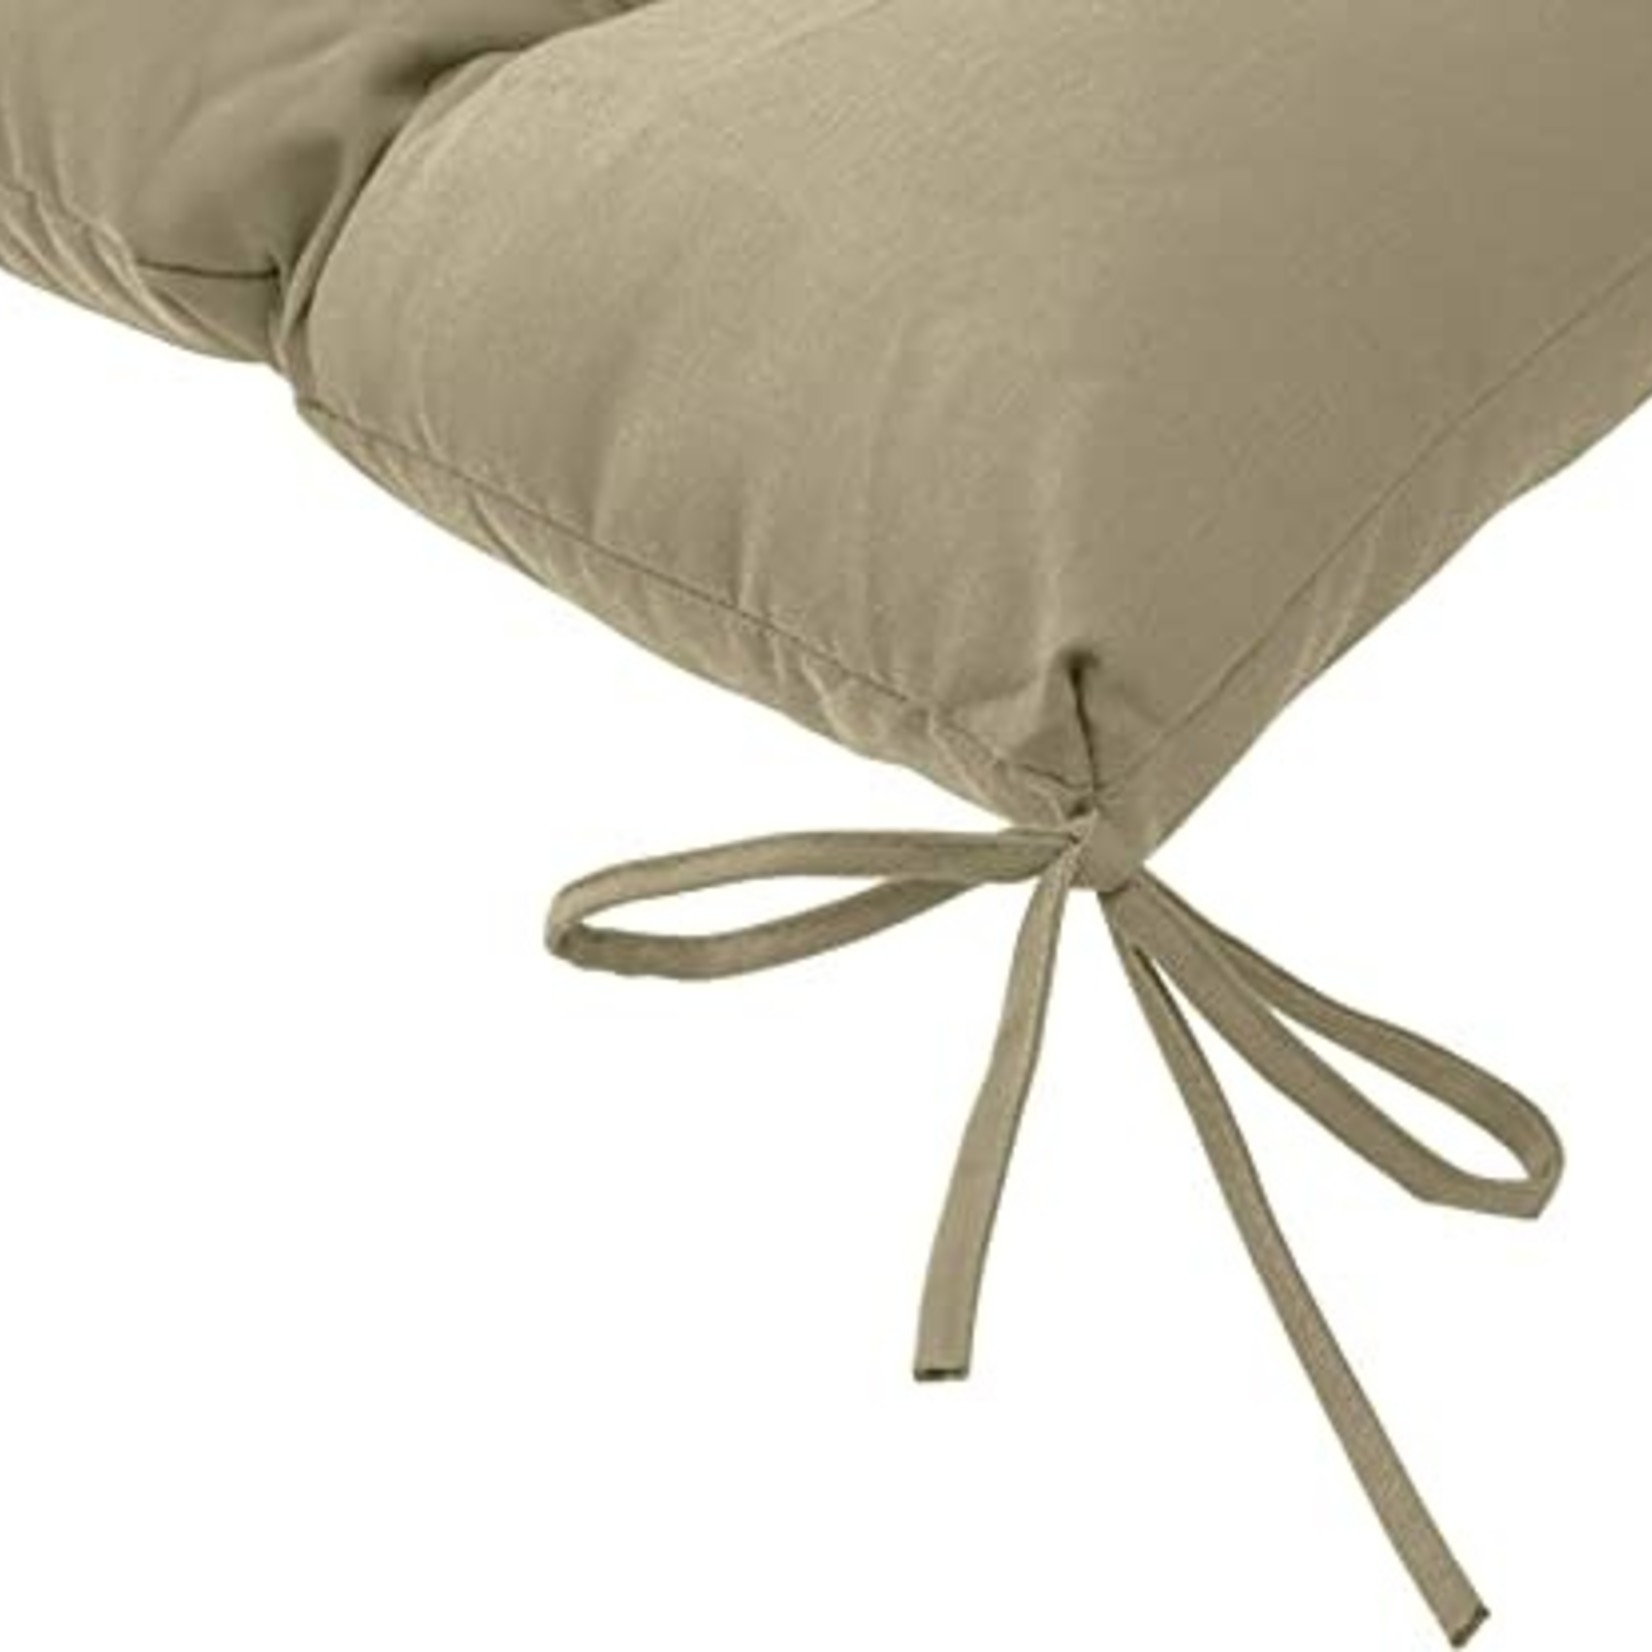 Qilloway Bench Cushion- 51 Inches- Beige